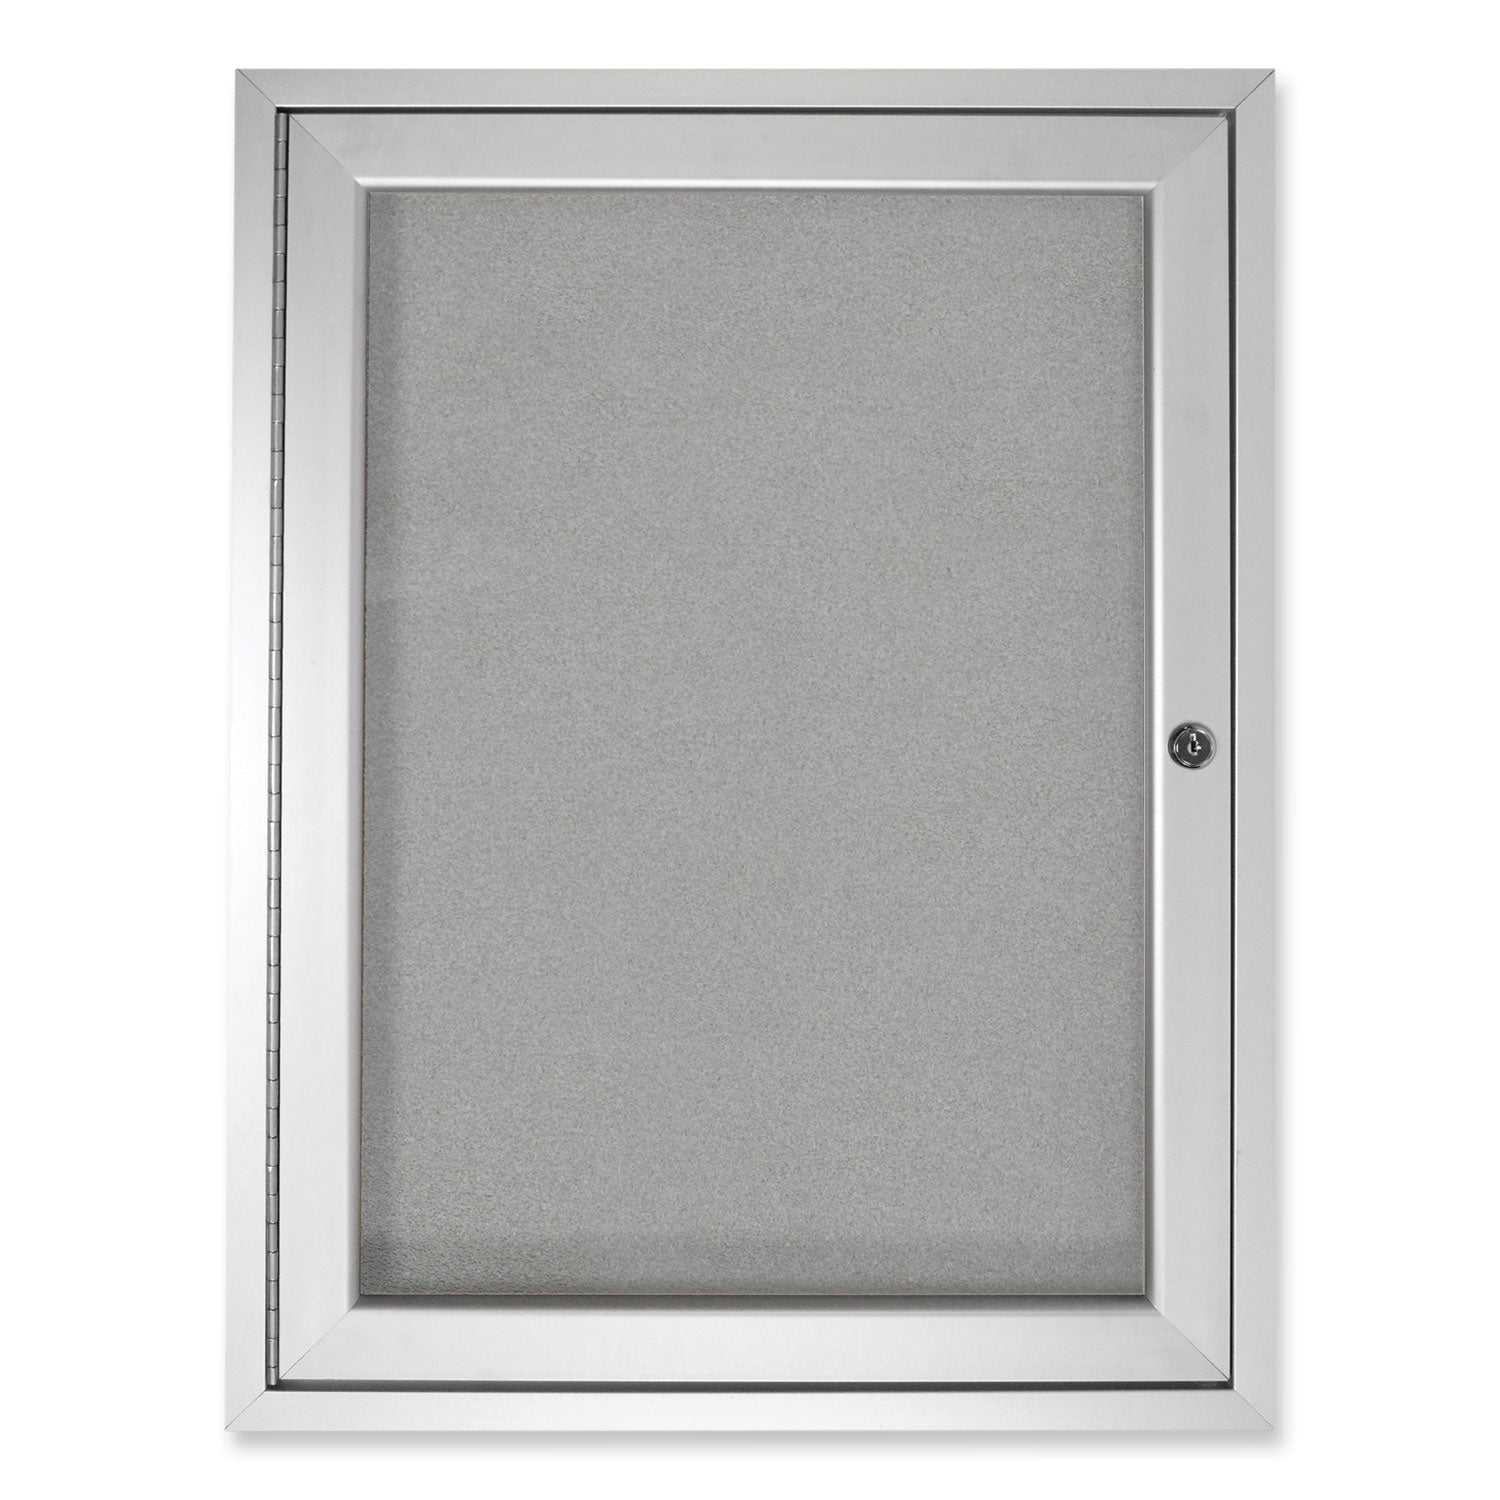 1-door-enclosed-vinyl-bulletin-board-with-satin-aluminum-frame-18-x-24-silver-surface-ships-in-7-10-business-days_ghepa12418vx193 - 1